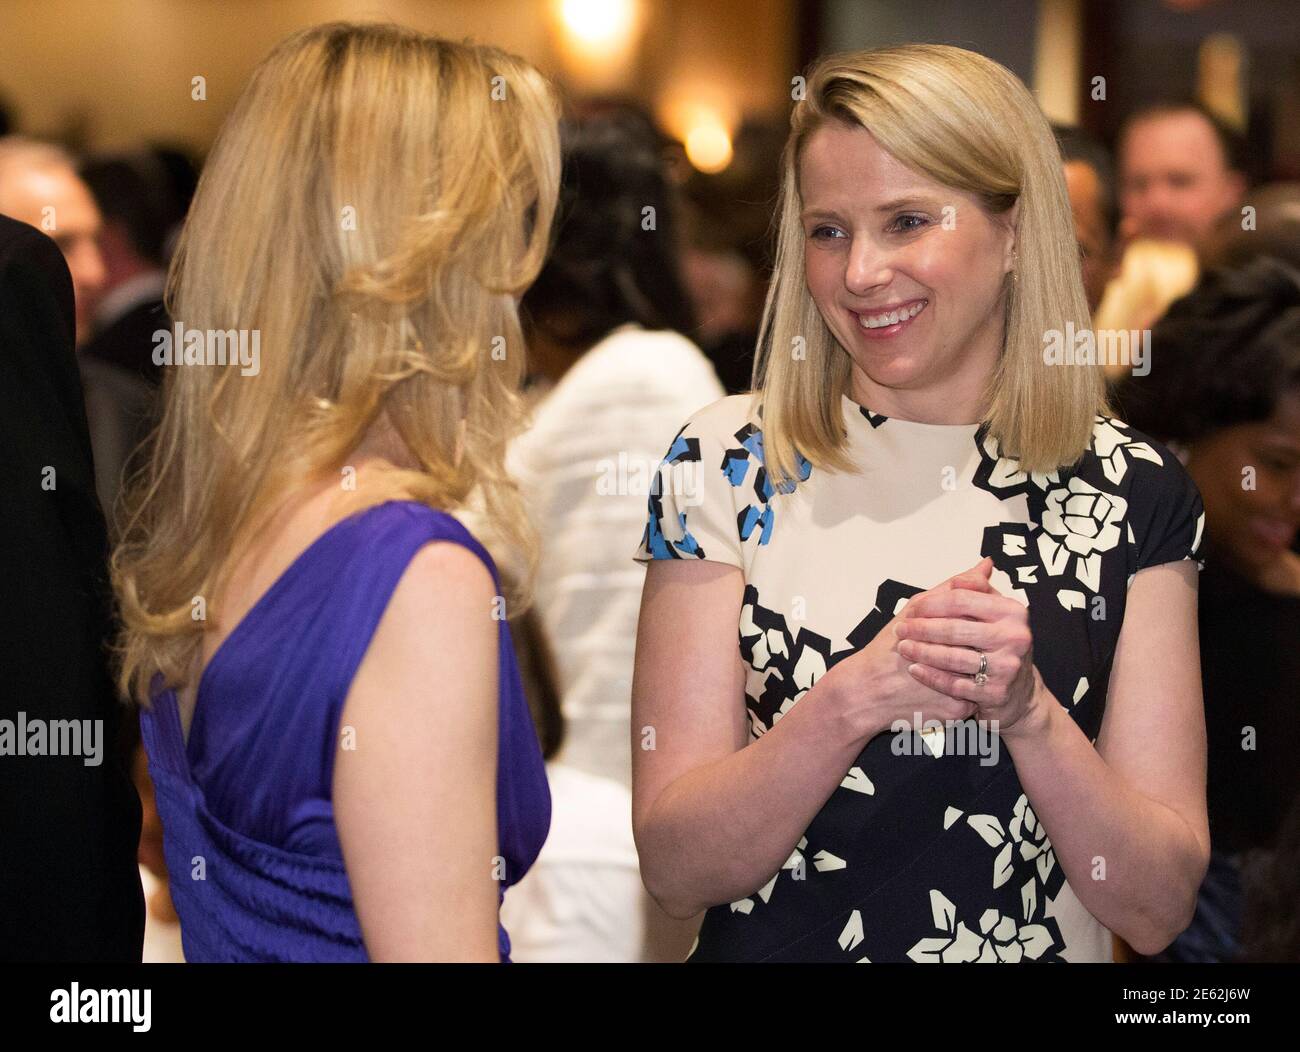 Yahoo Chief Executive Officer Ceo Marissa Meyer R Speaks With A Guest At The White House Correspondents Association Dinner In Washington May 3 14 Reuters Joshua Roberts United States s Politics Media